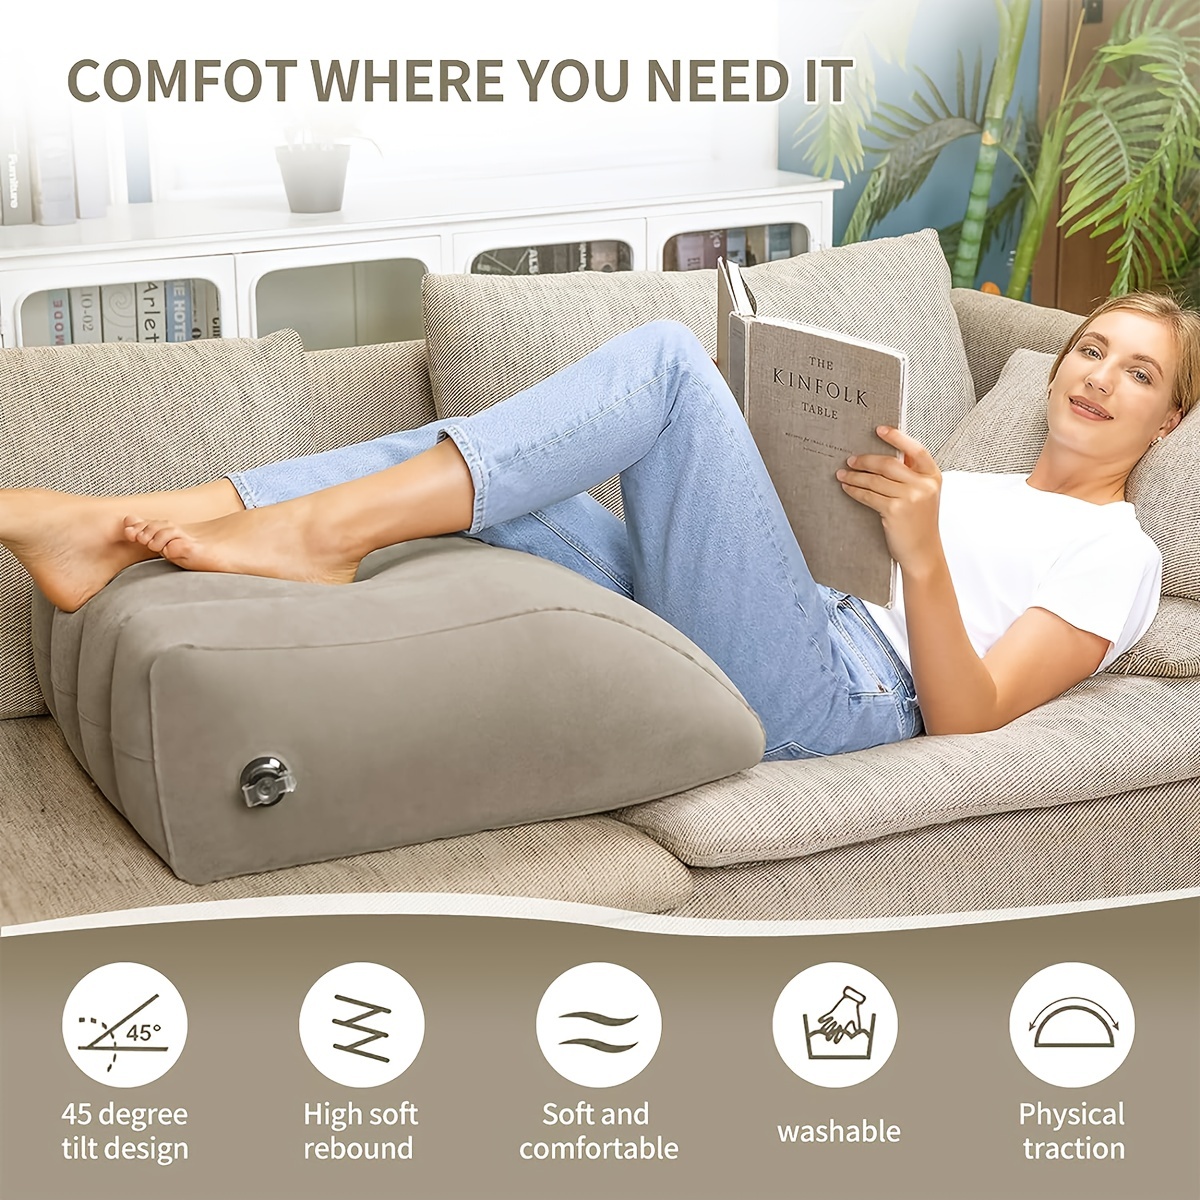 Large Elevating Leg Wedge Pillow for Back Hip Knee Pain Sleeping Reading  Resting